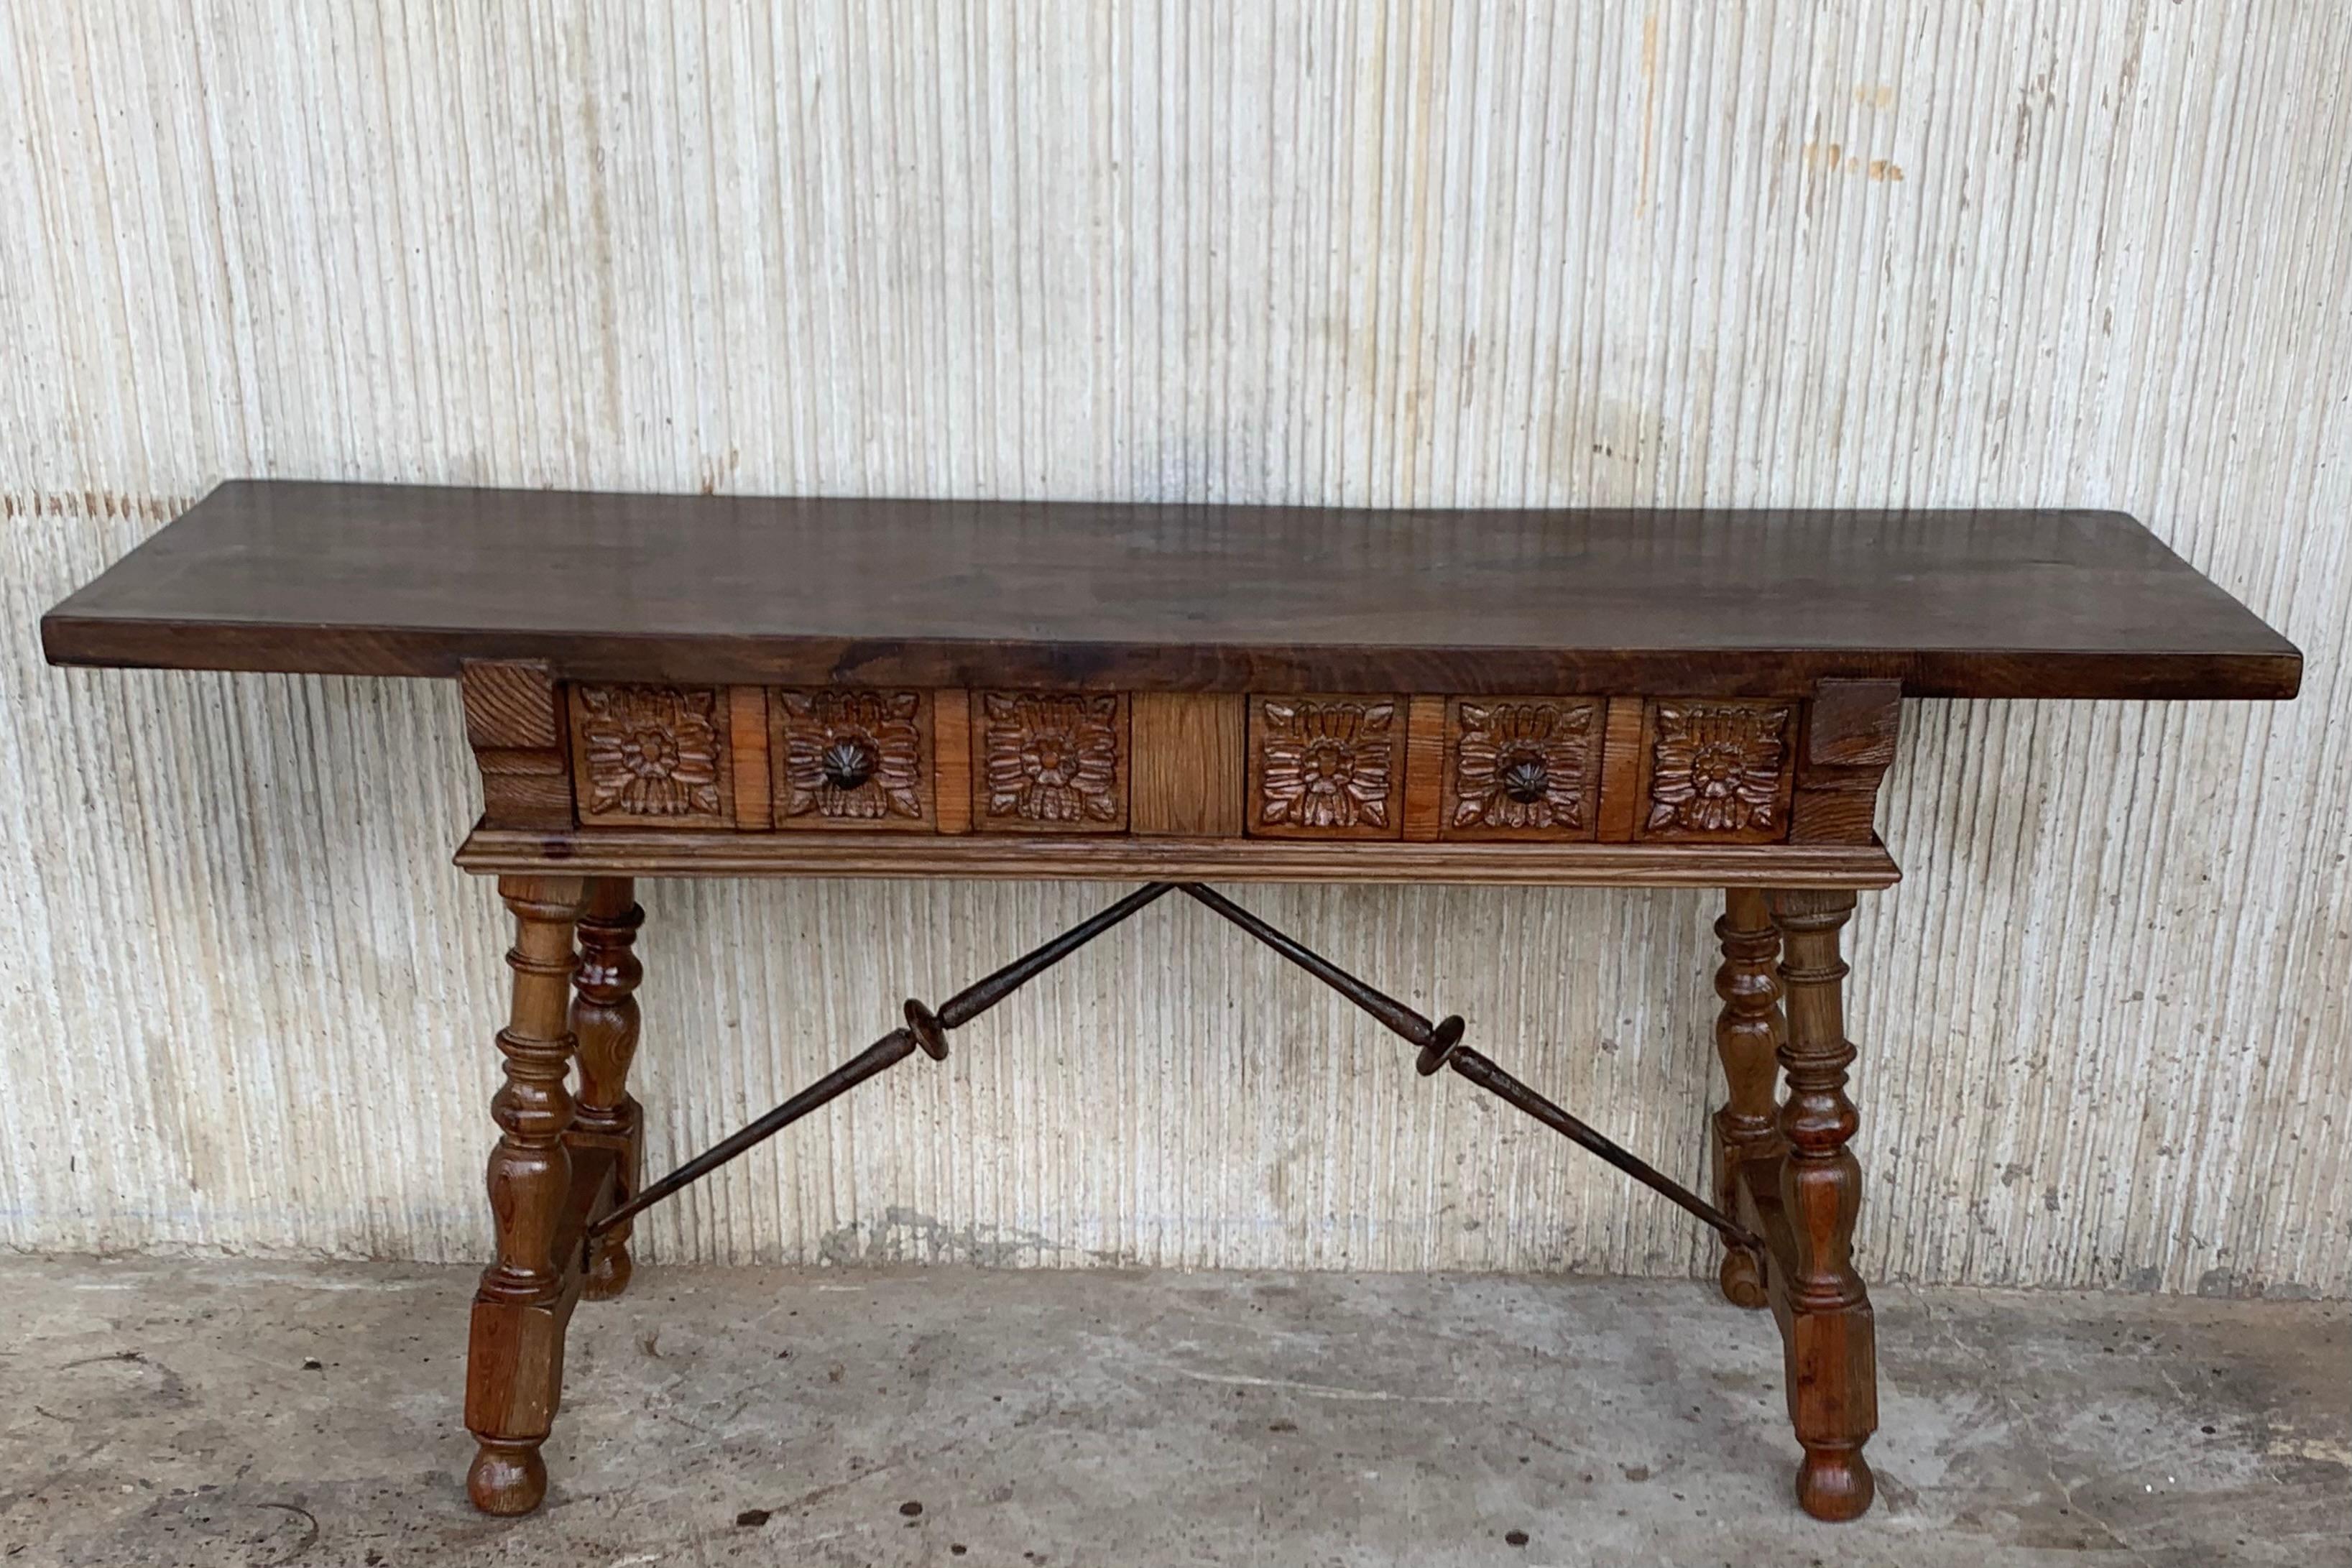 A Spanish Baroque style walnut table from the late 19th century, with two drawers, caved legs and iron hardware. Born in Spain in the first decade of the 20th century, this exquisite walnut table features a rectangular planked top sitting above two